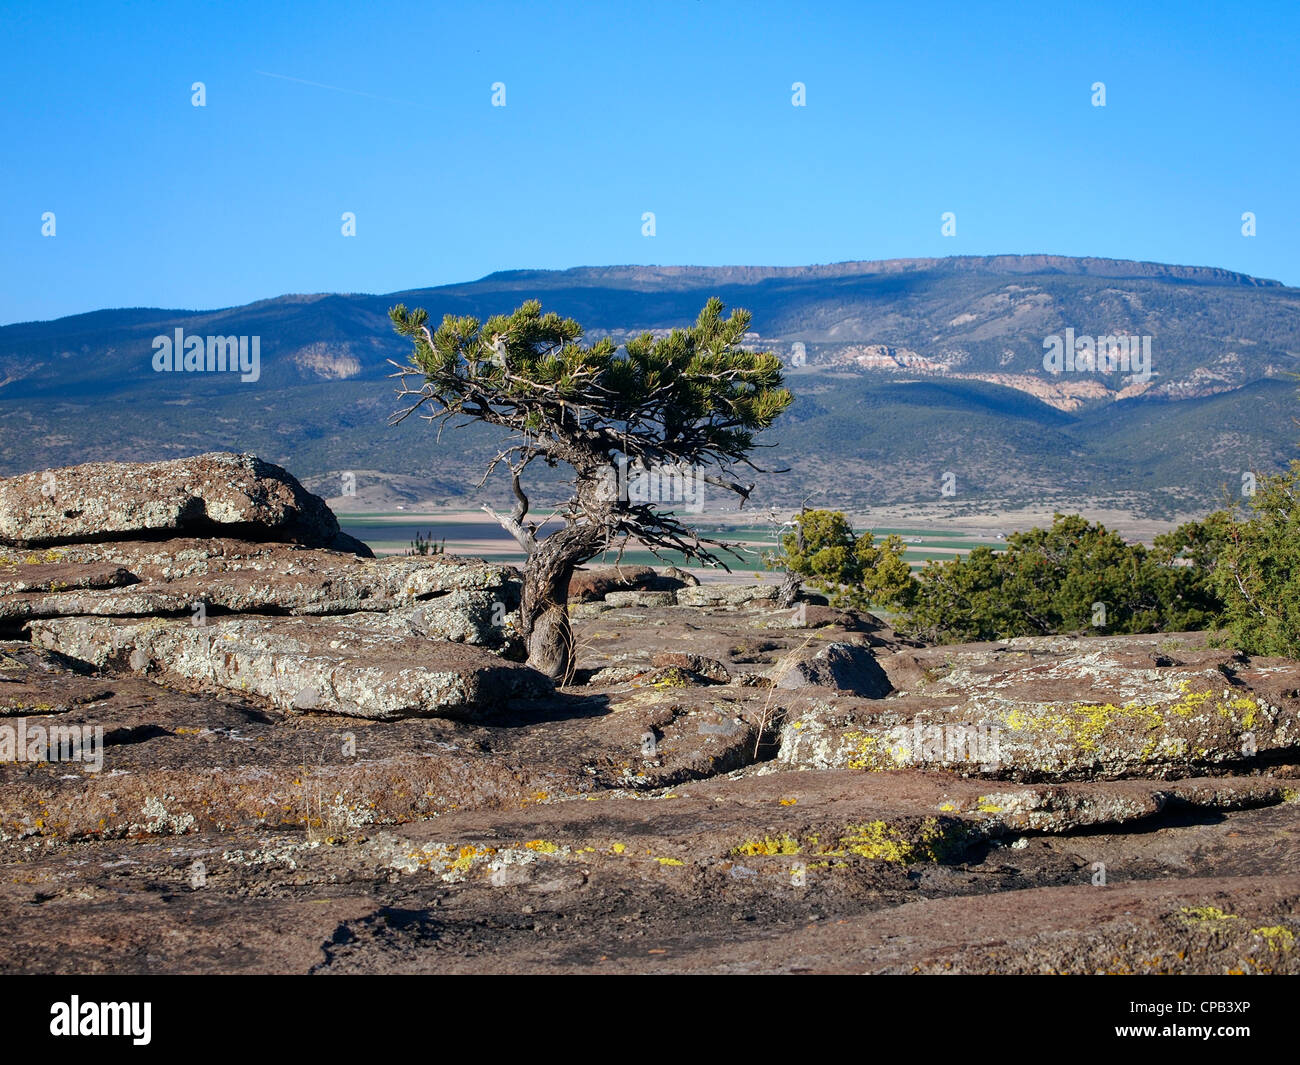 High plateau in background with small pinyon tree in foreground. Stock Photo